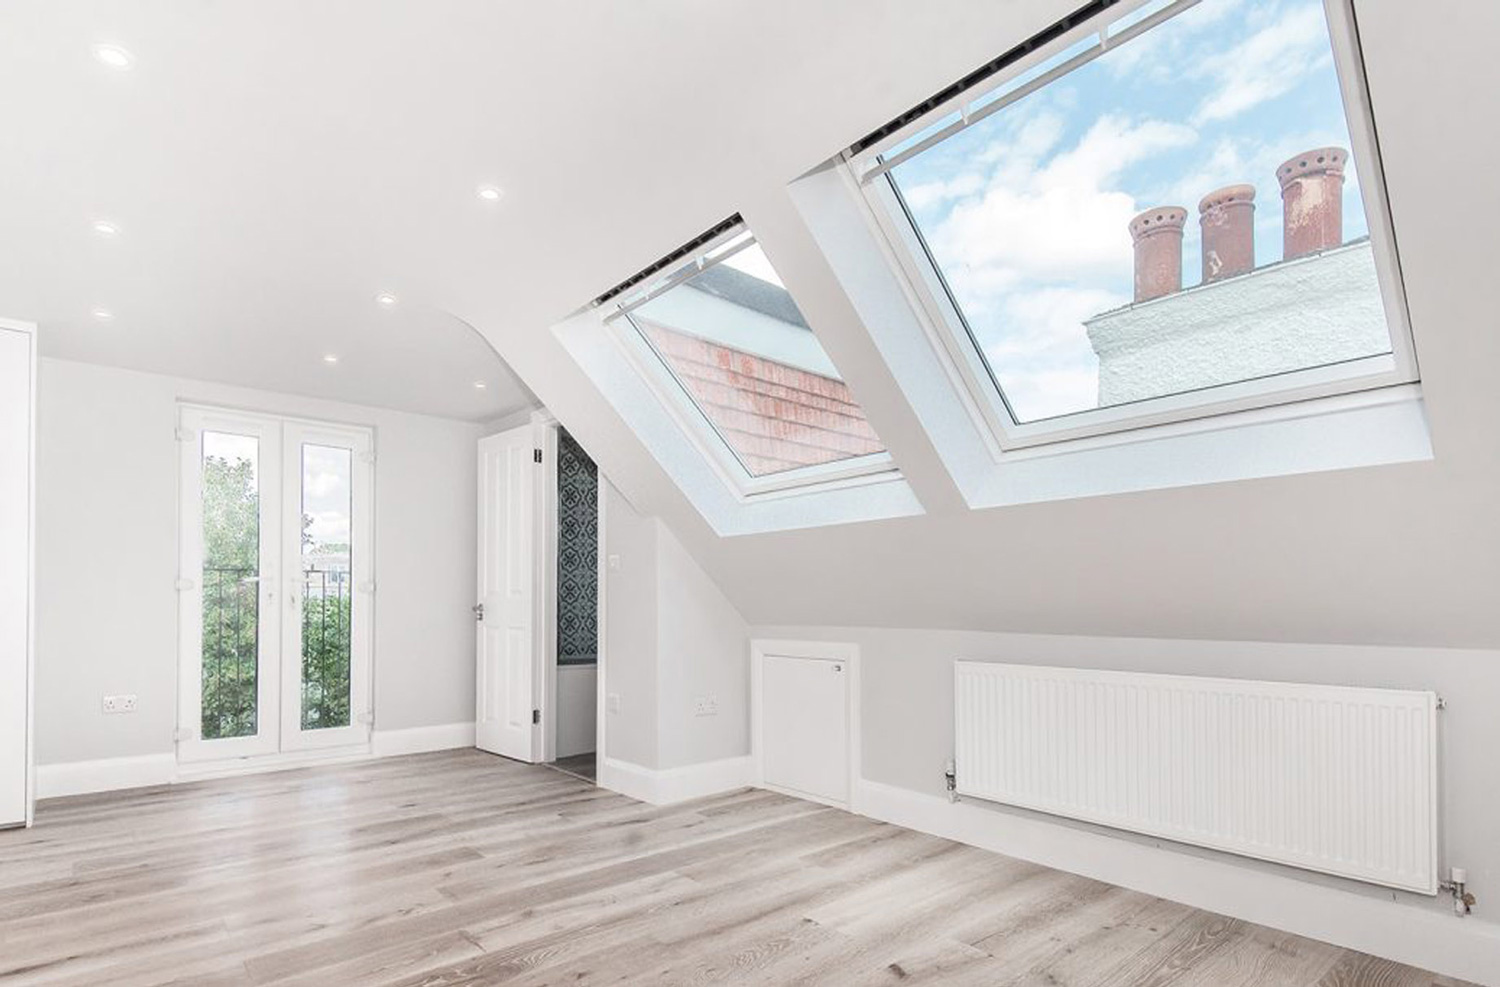 Loft Conversions In Nottingham by House Alterations Architecture